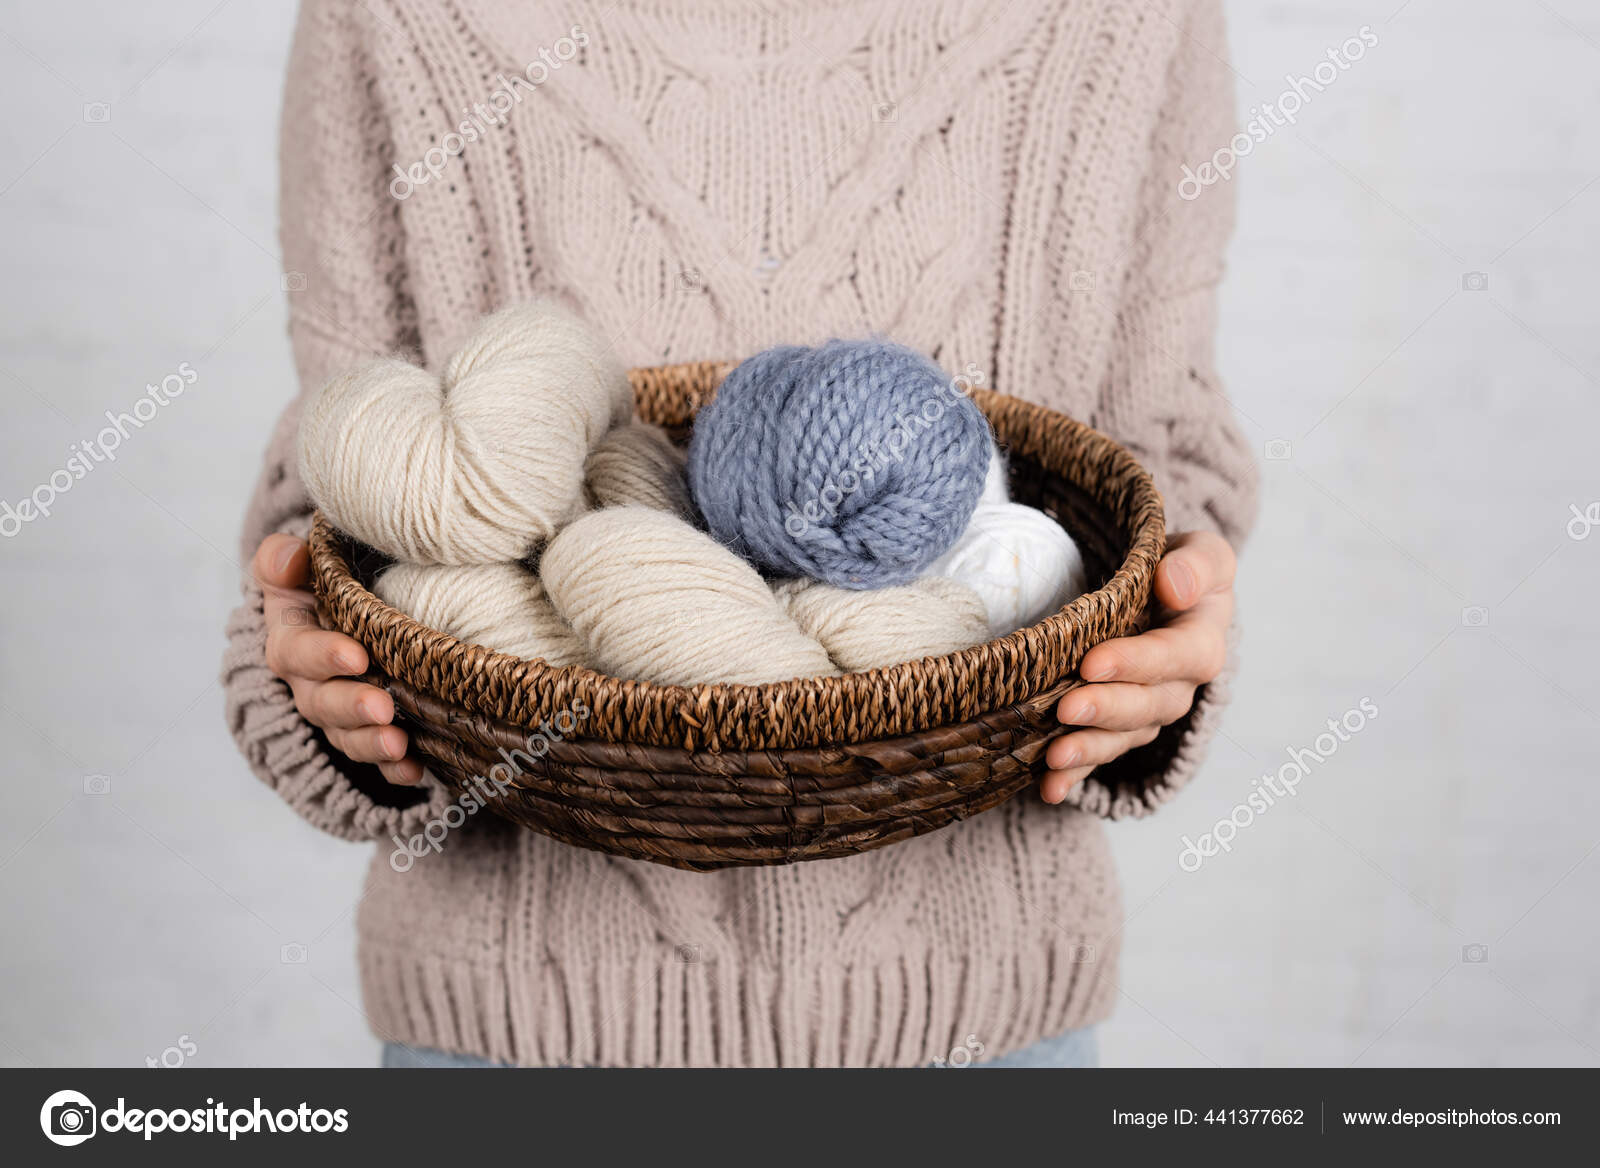 Girl Holding in Hand on of the Crochet Yarn Ball Stock Image